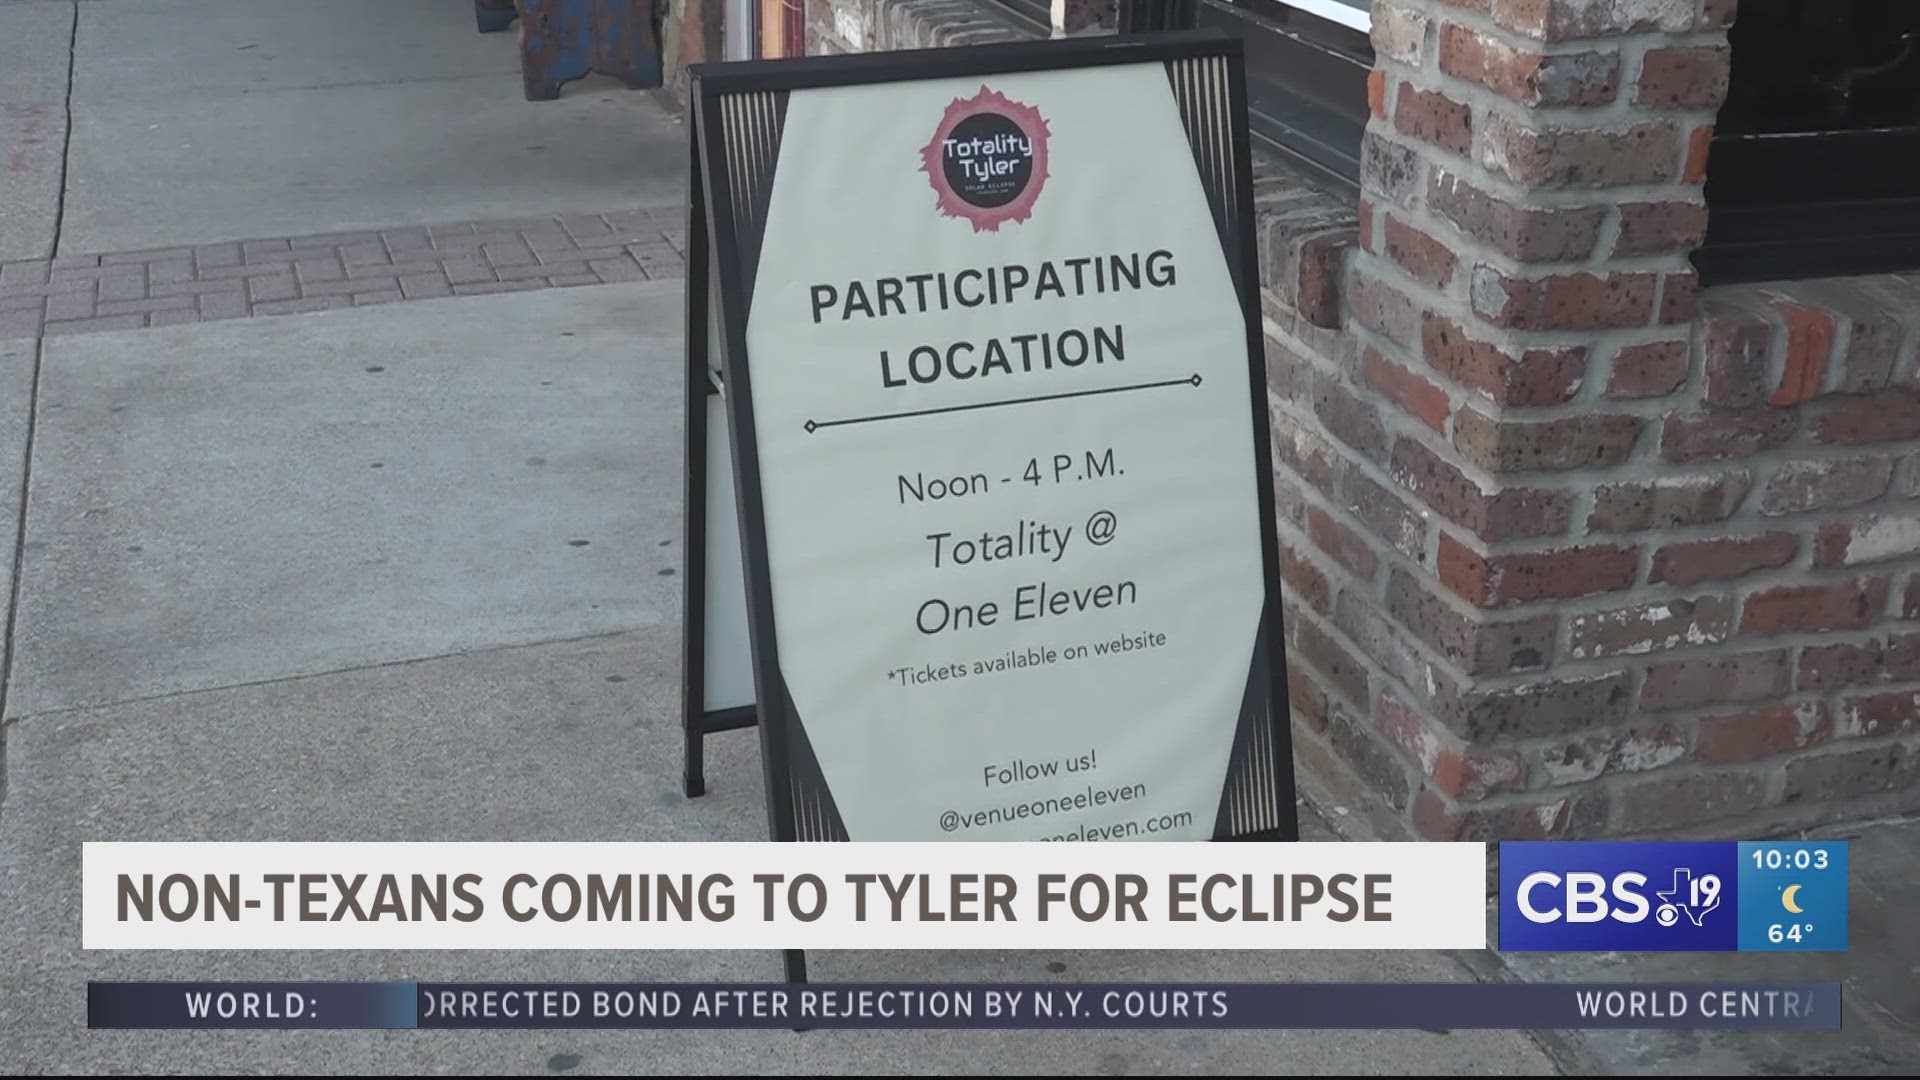 Non-Texans head to Tyler for historic total solar eclipse